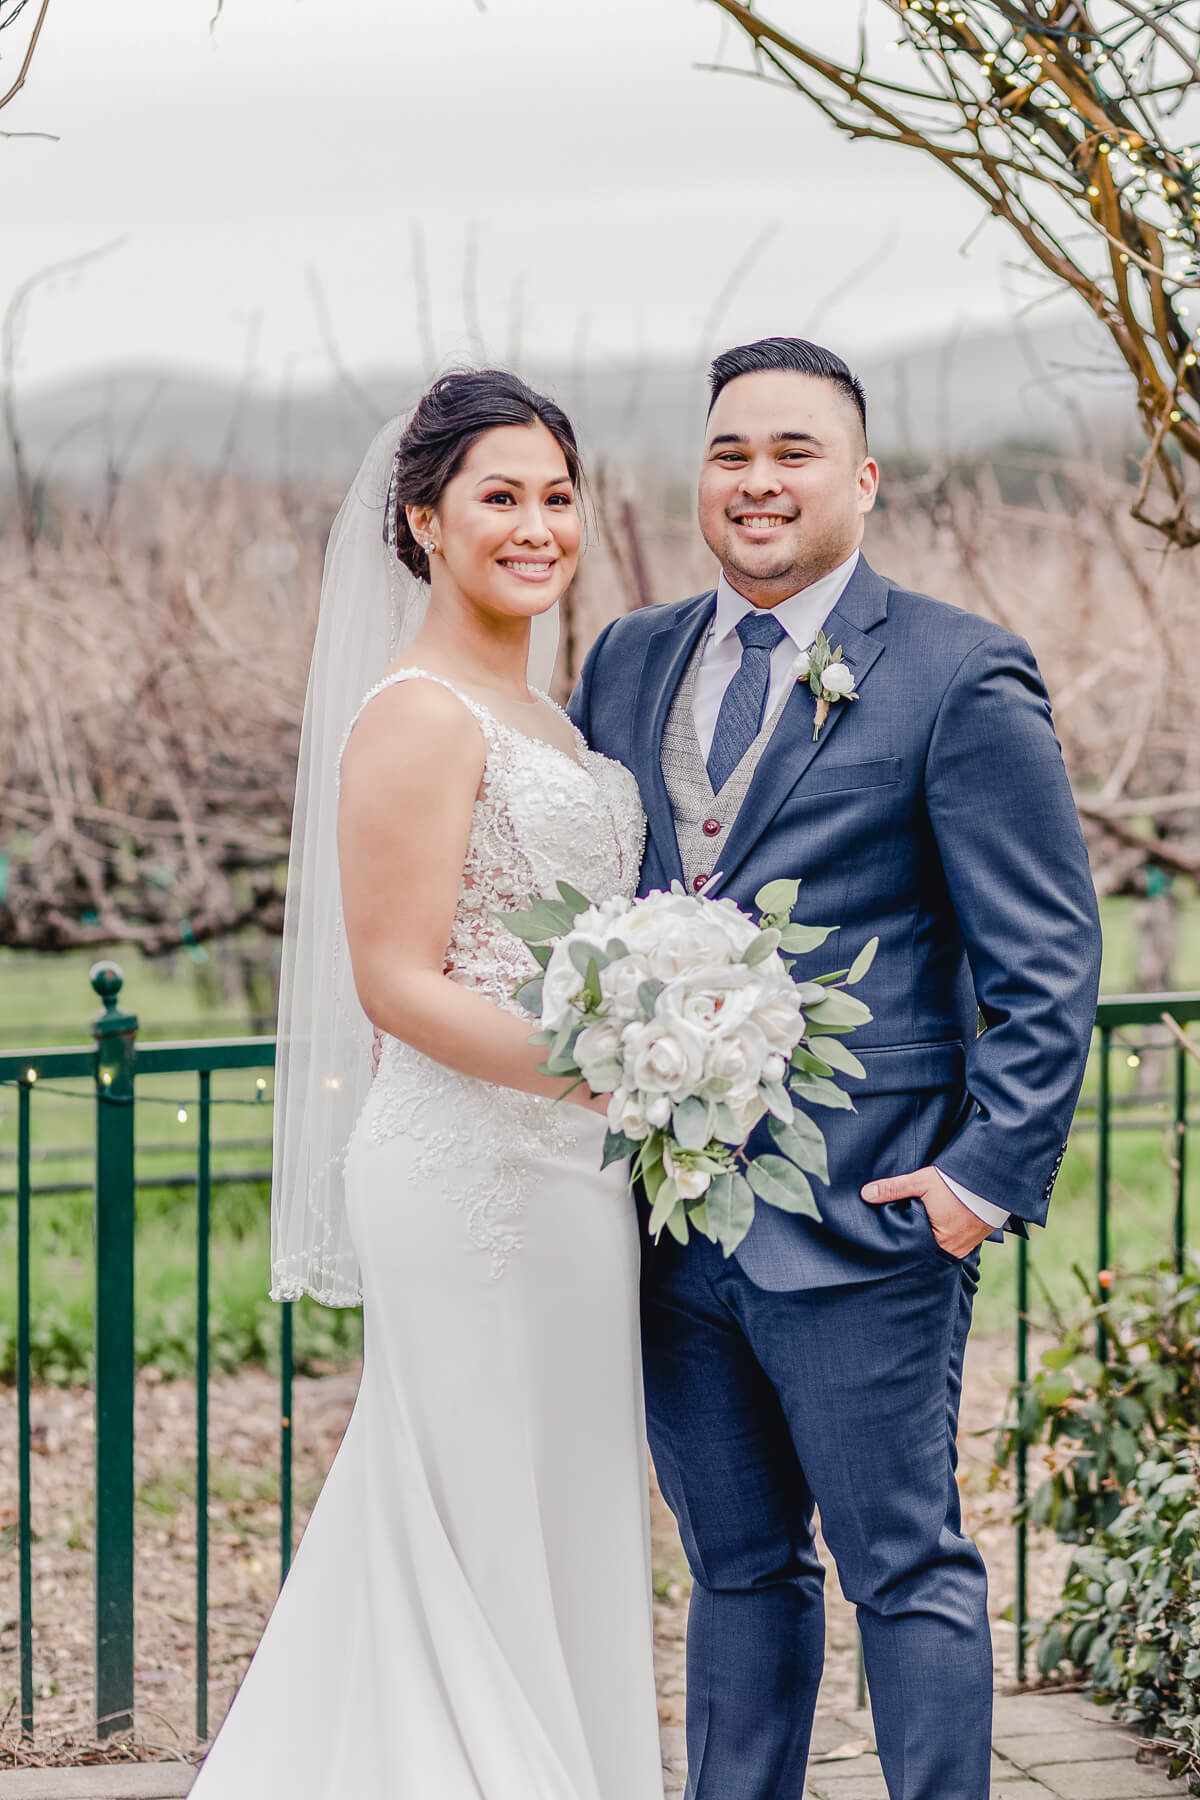 Groom and bride portrait at their winter wedding